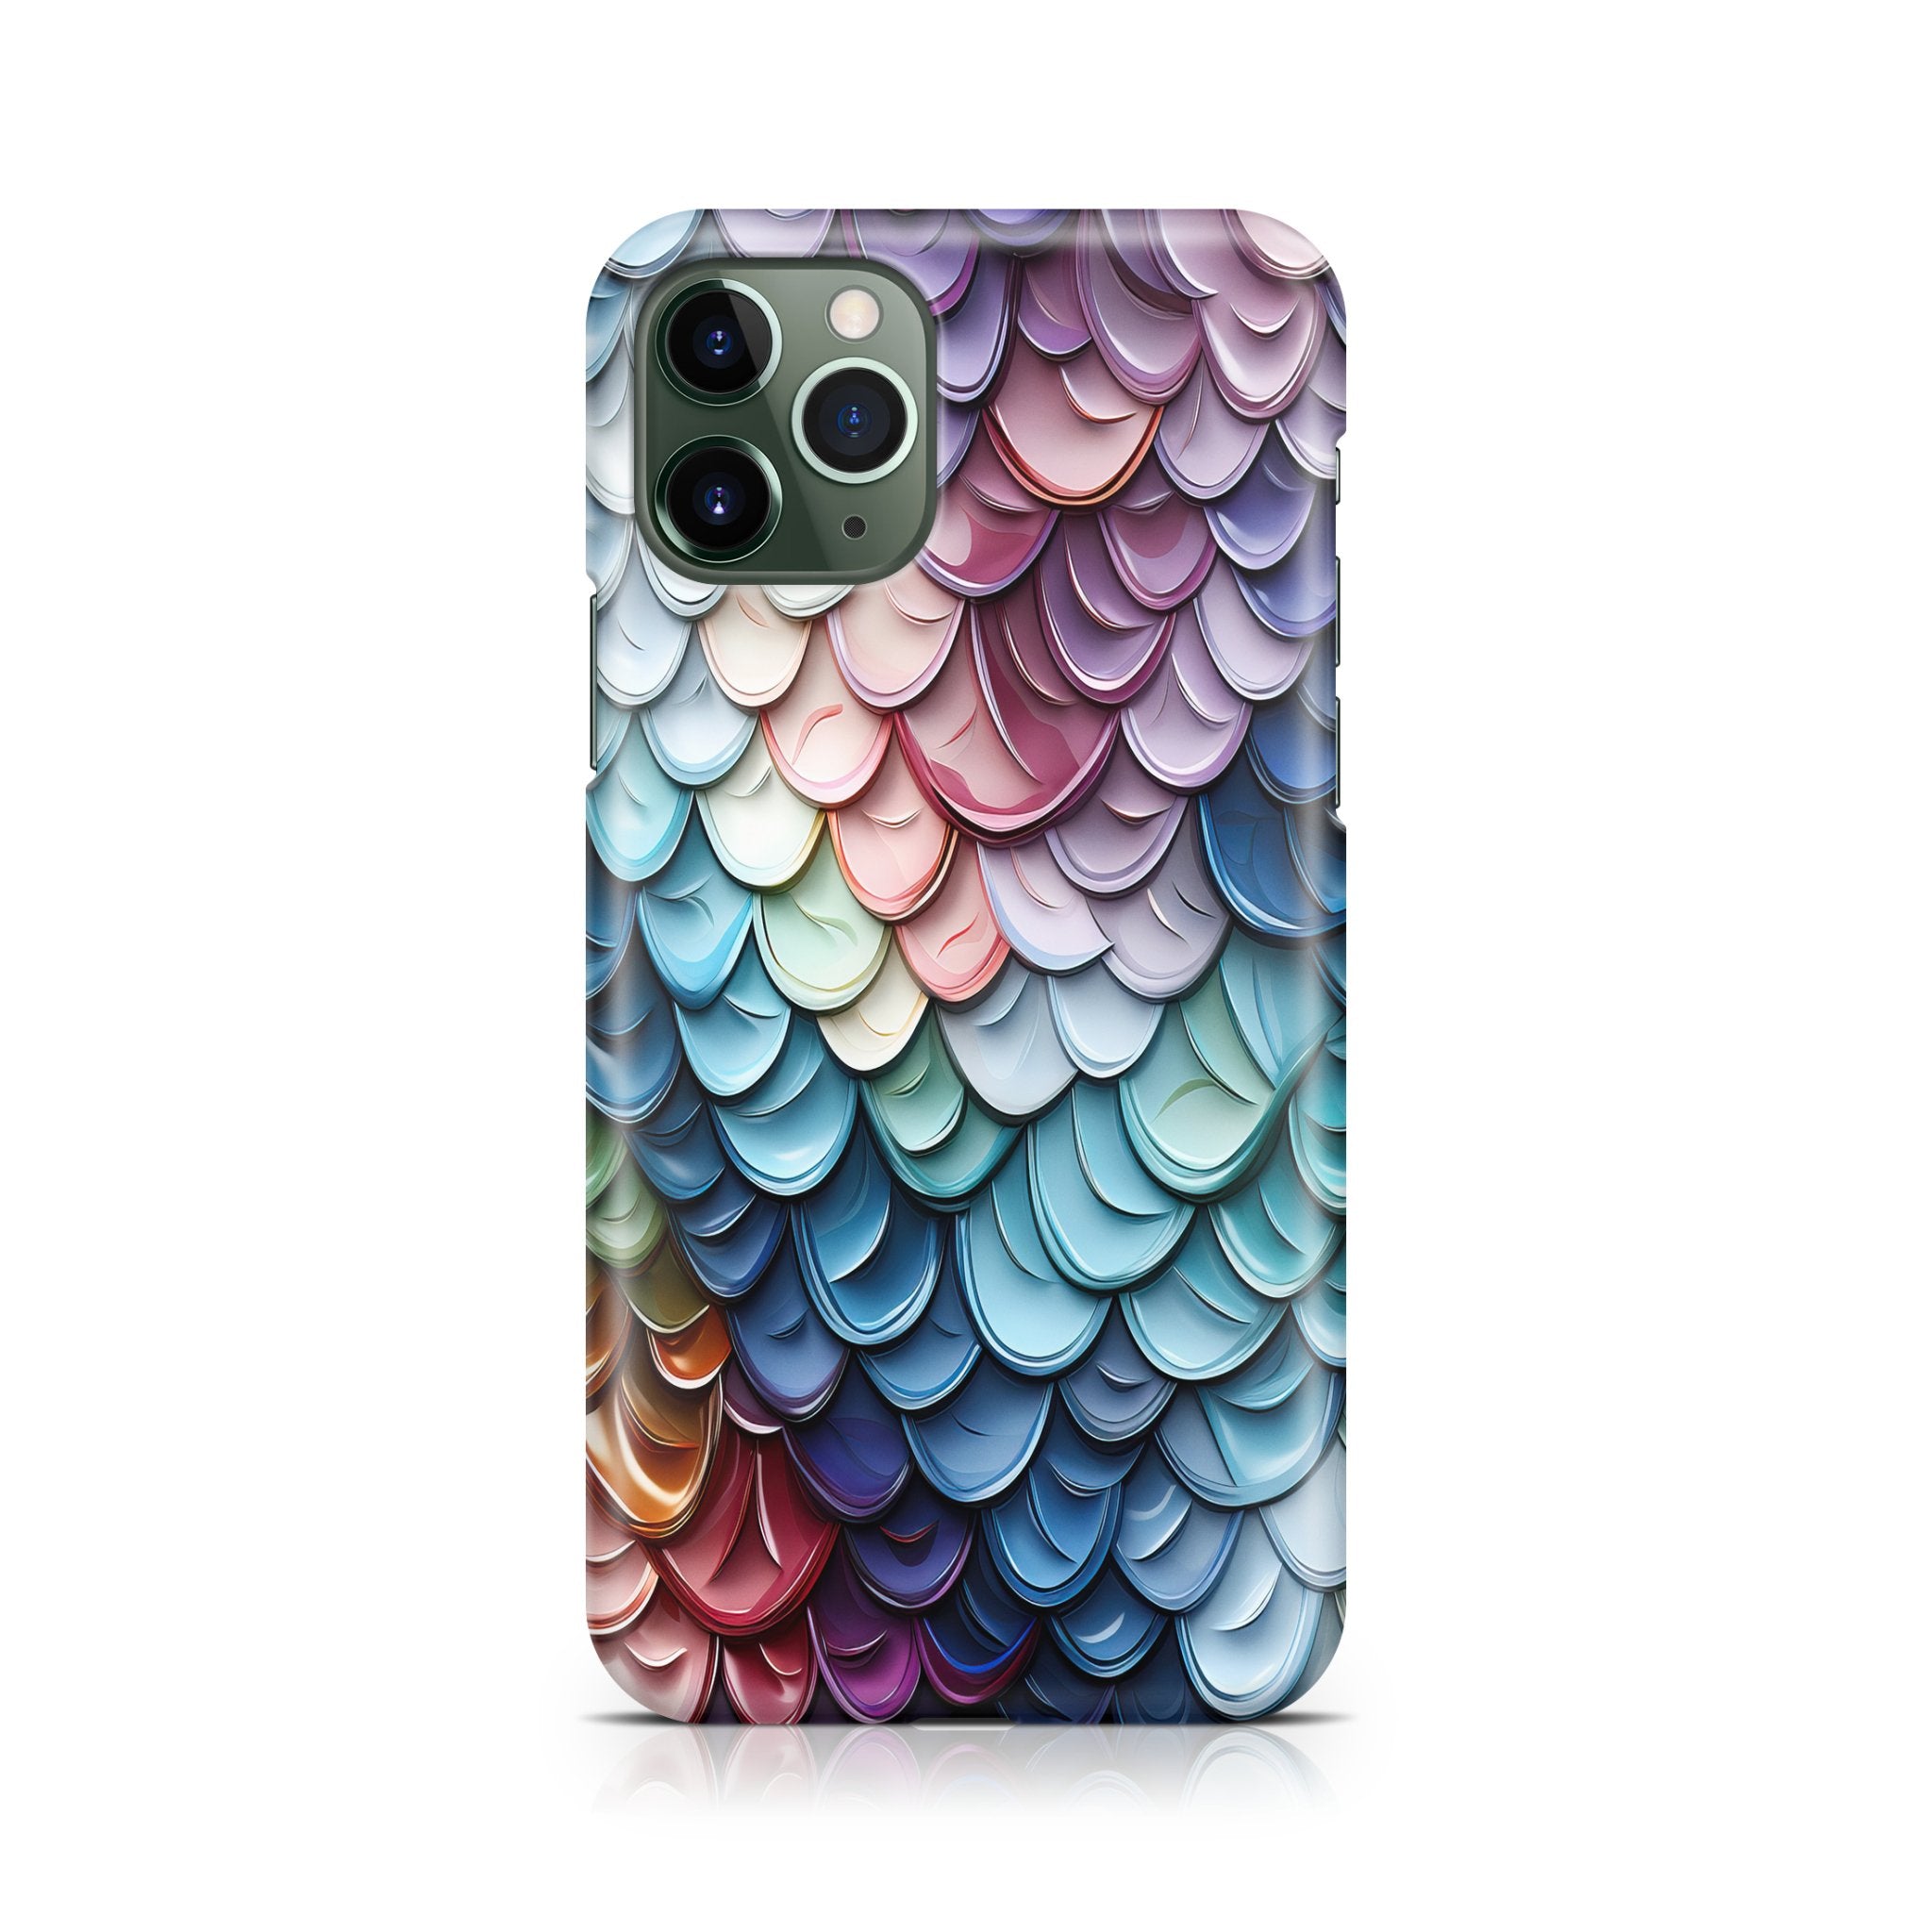 Chromatic Splendor - iPhone phone case designs by CaseSwagger